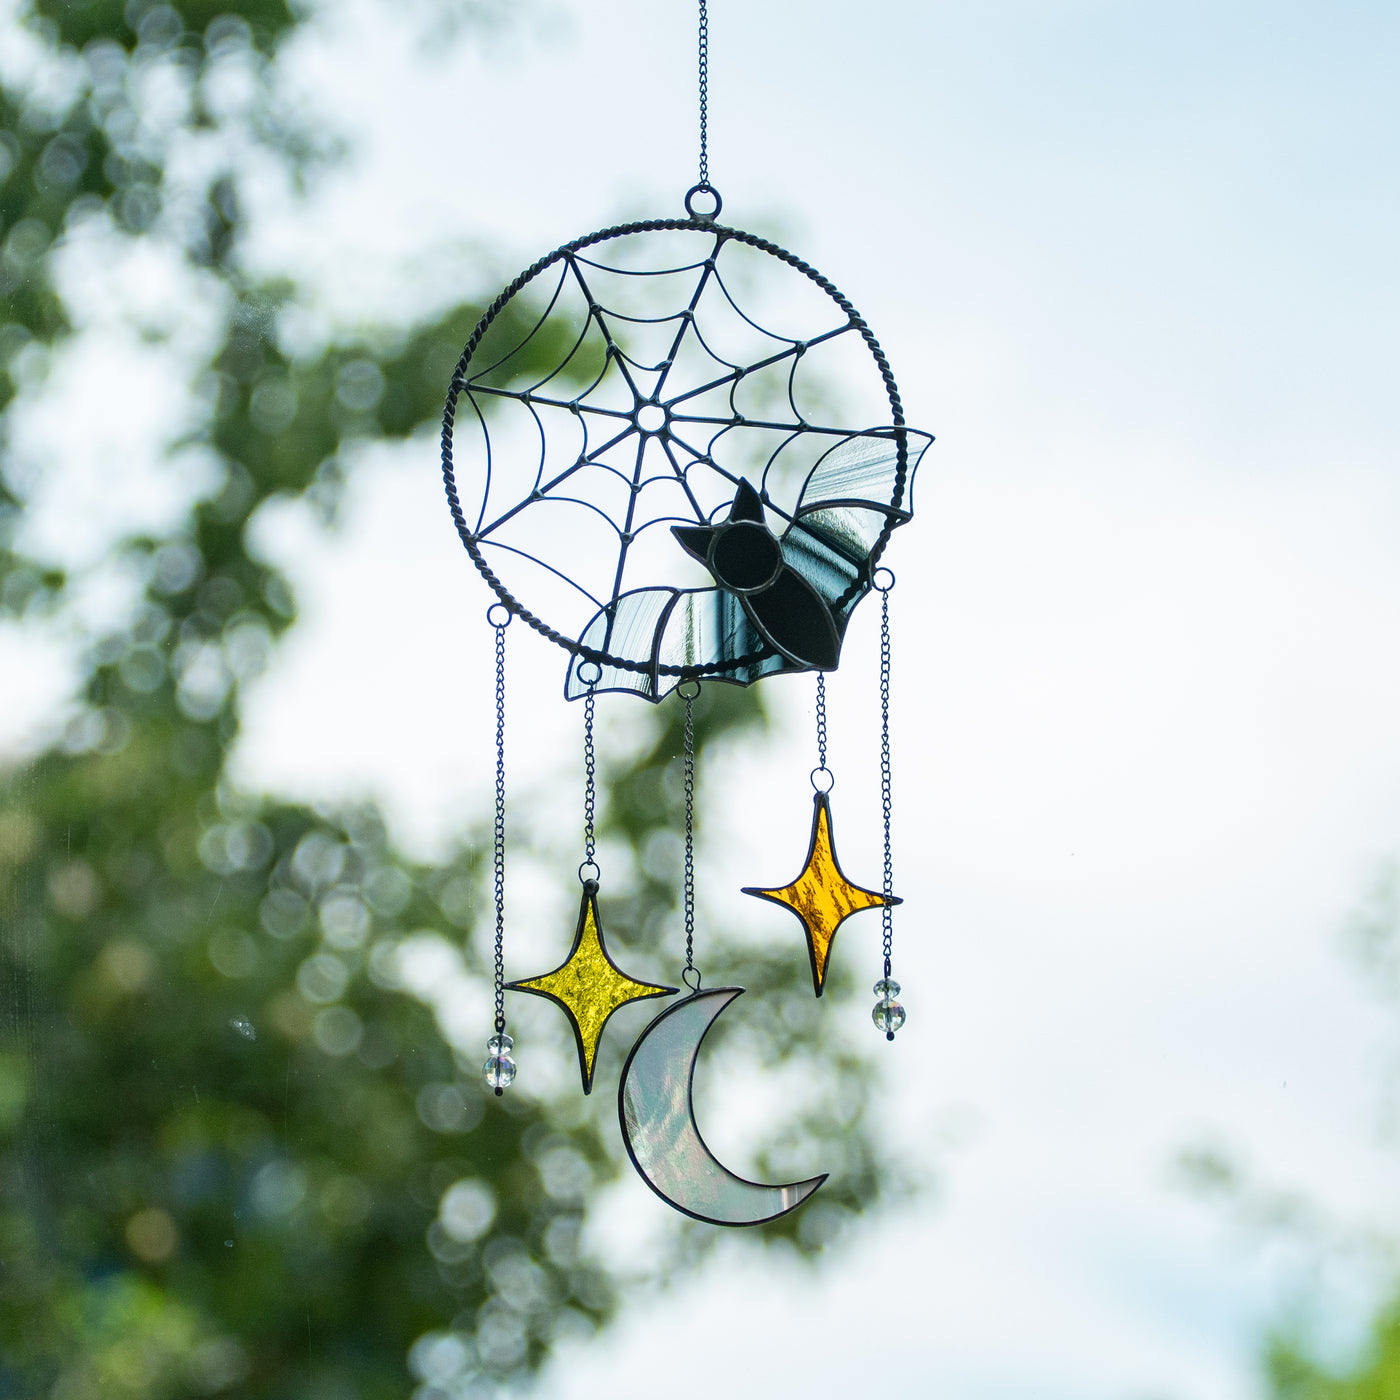 Stained glass black bat dreamcatcher with stars and semi-moon in lower part